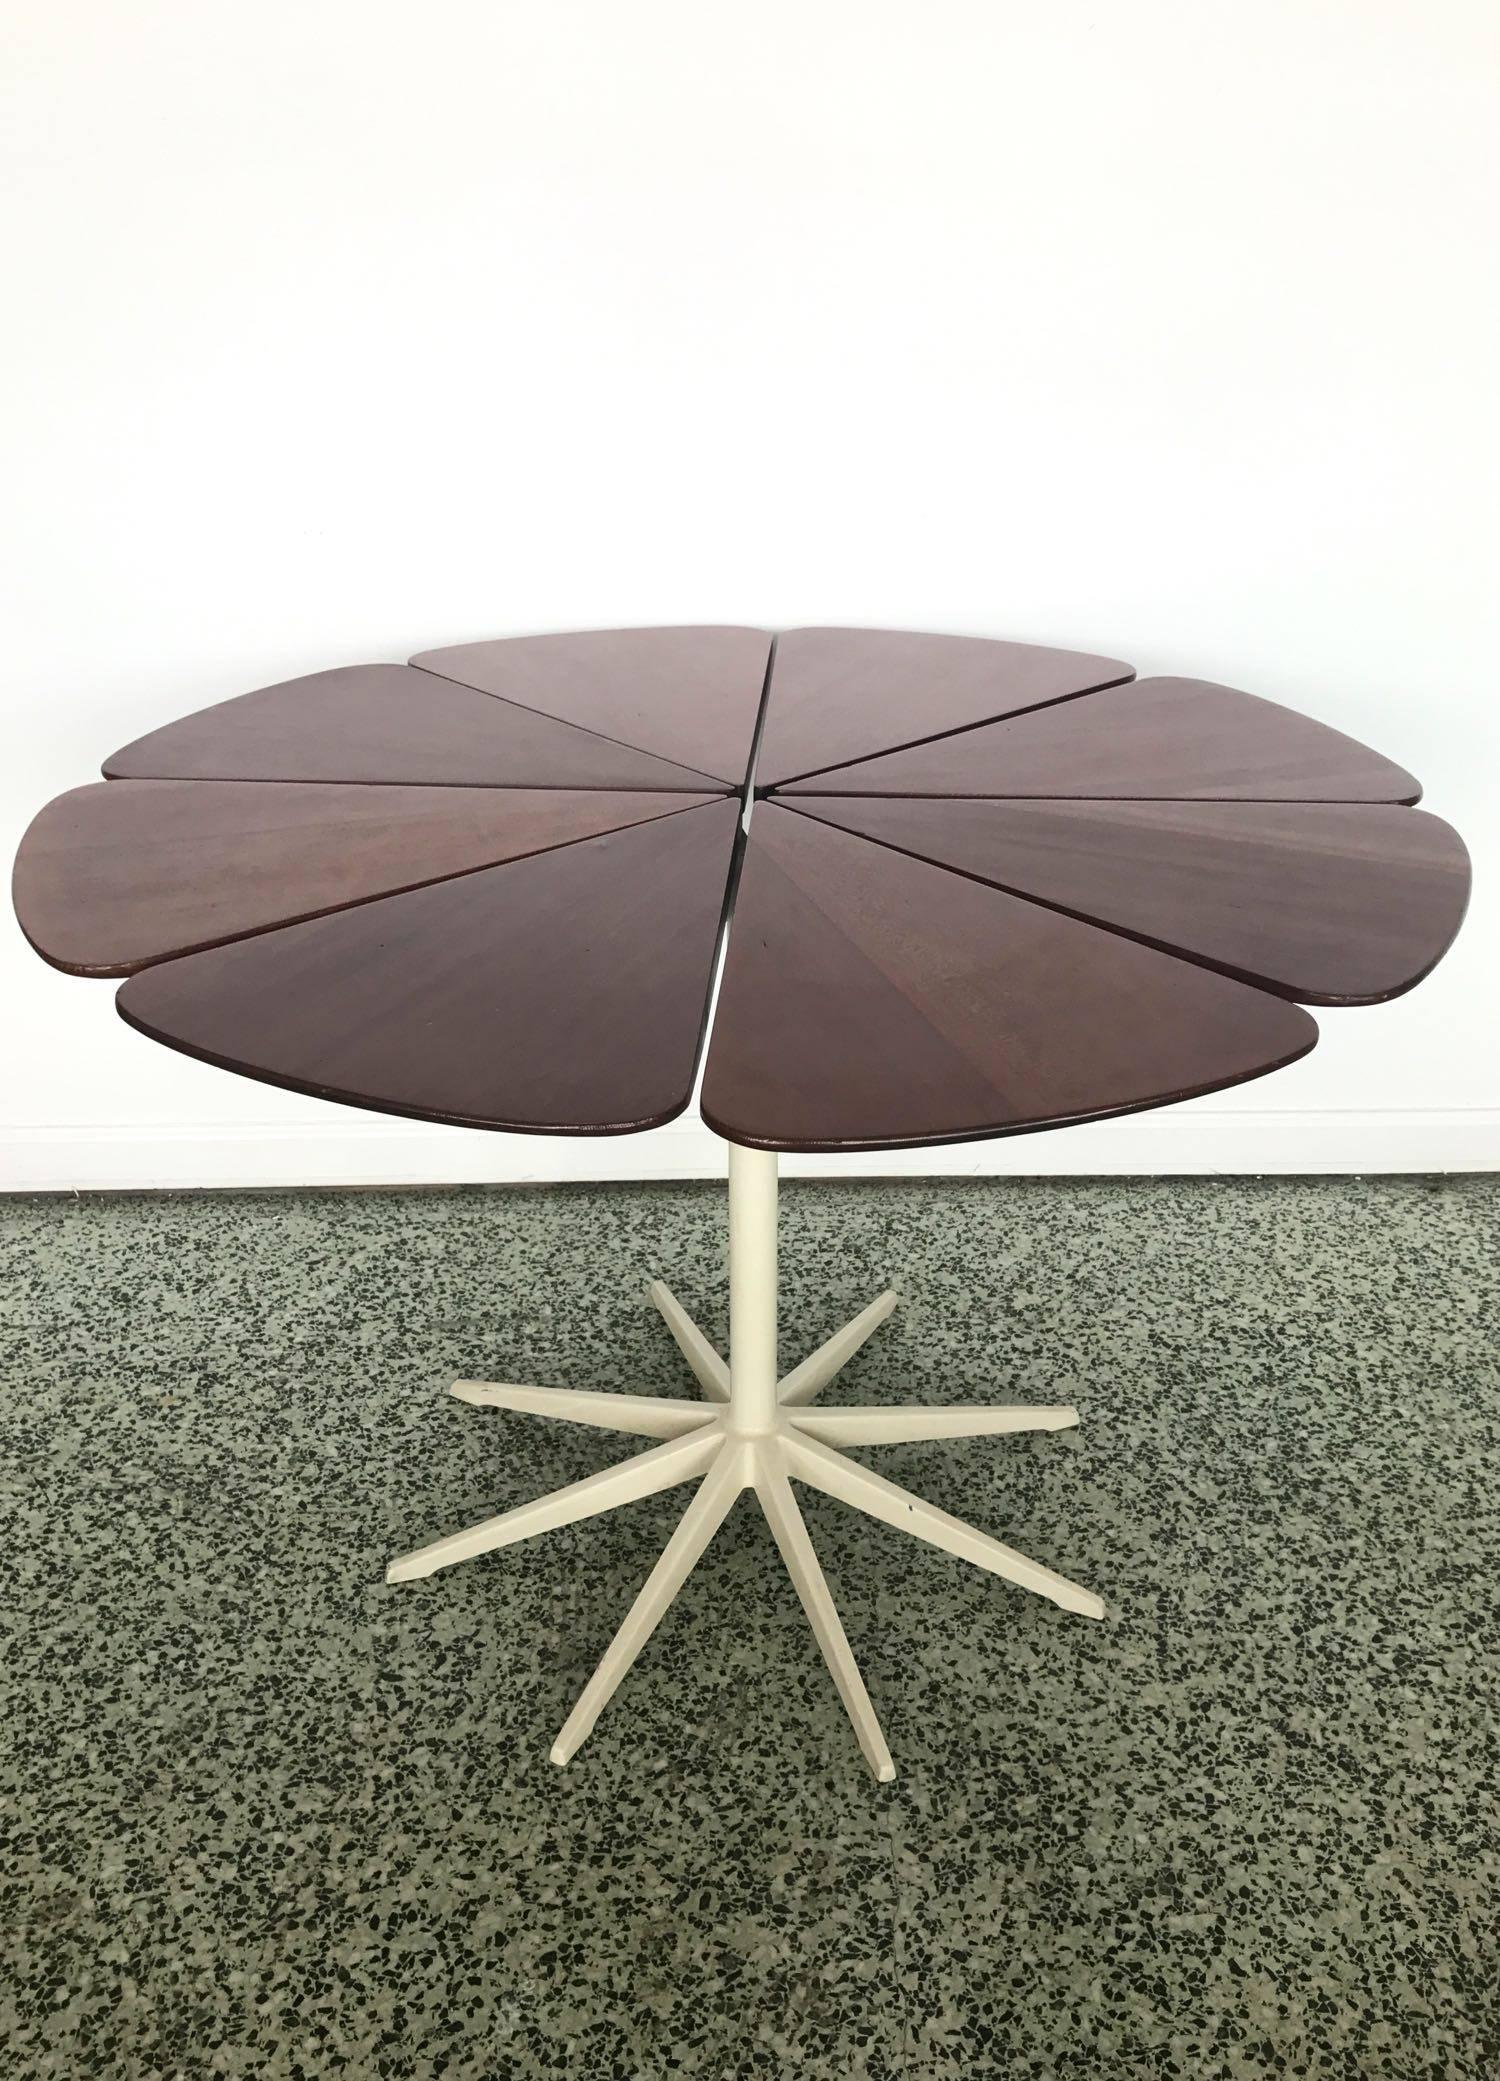 20th Century Richard Schultz for Knoll Petal Dining Table